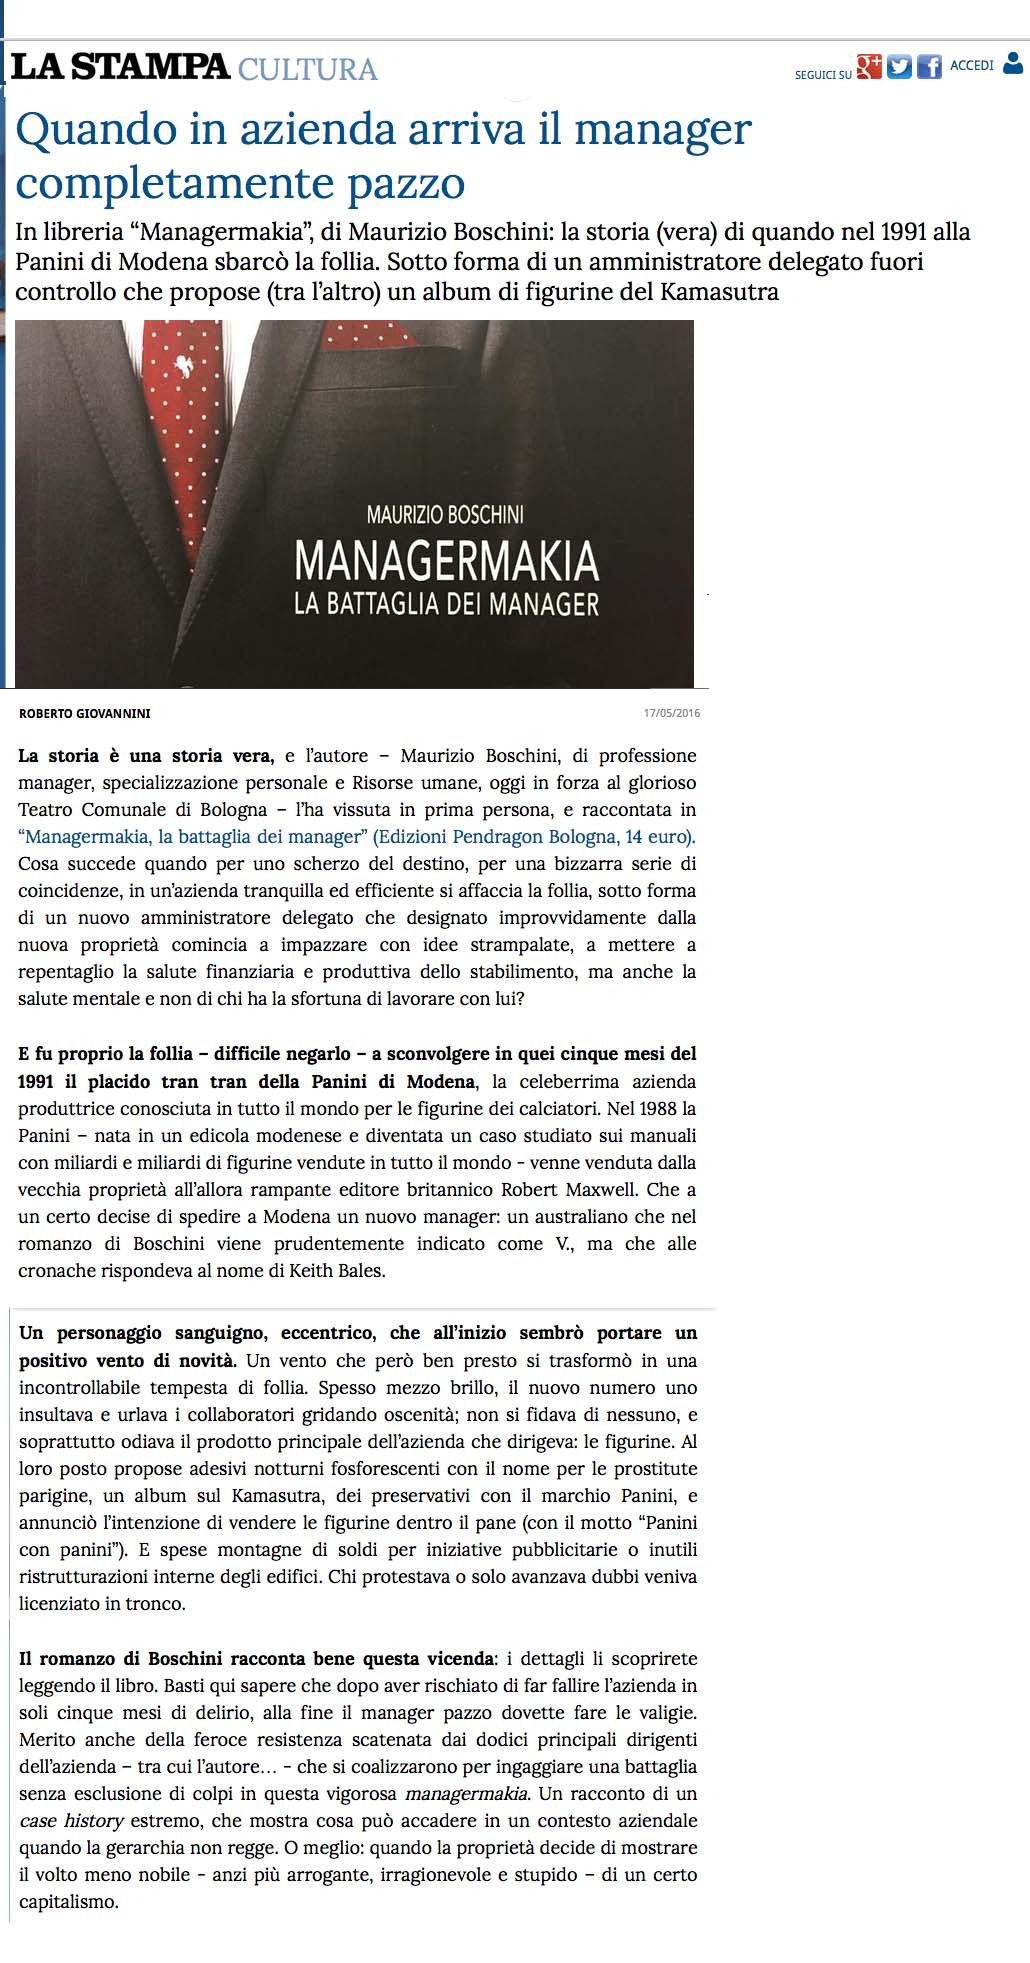 Managermakia